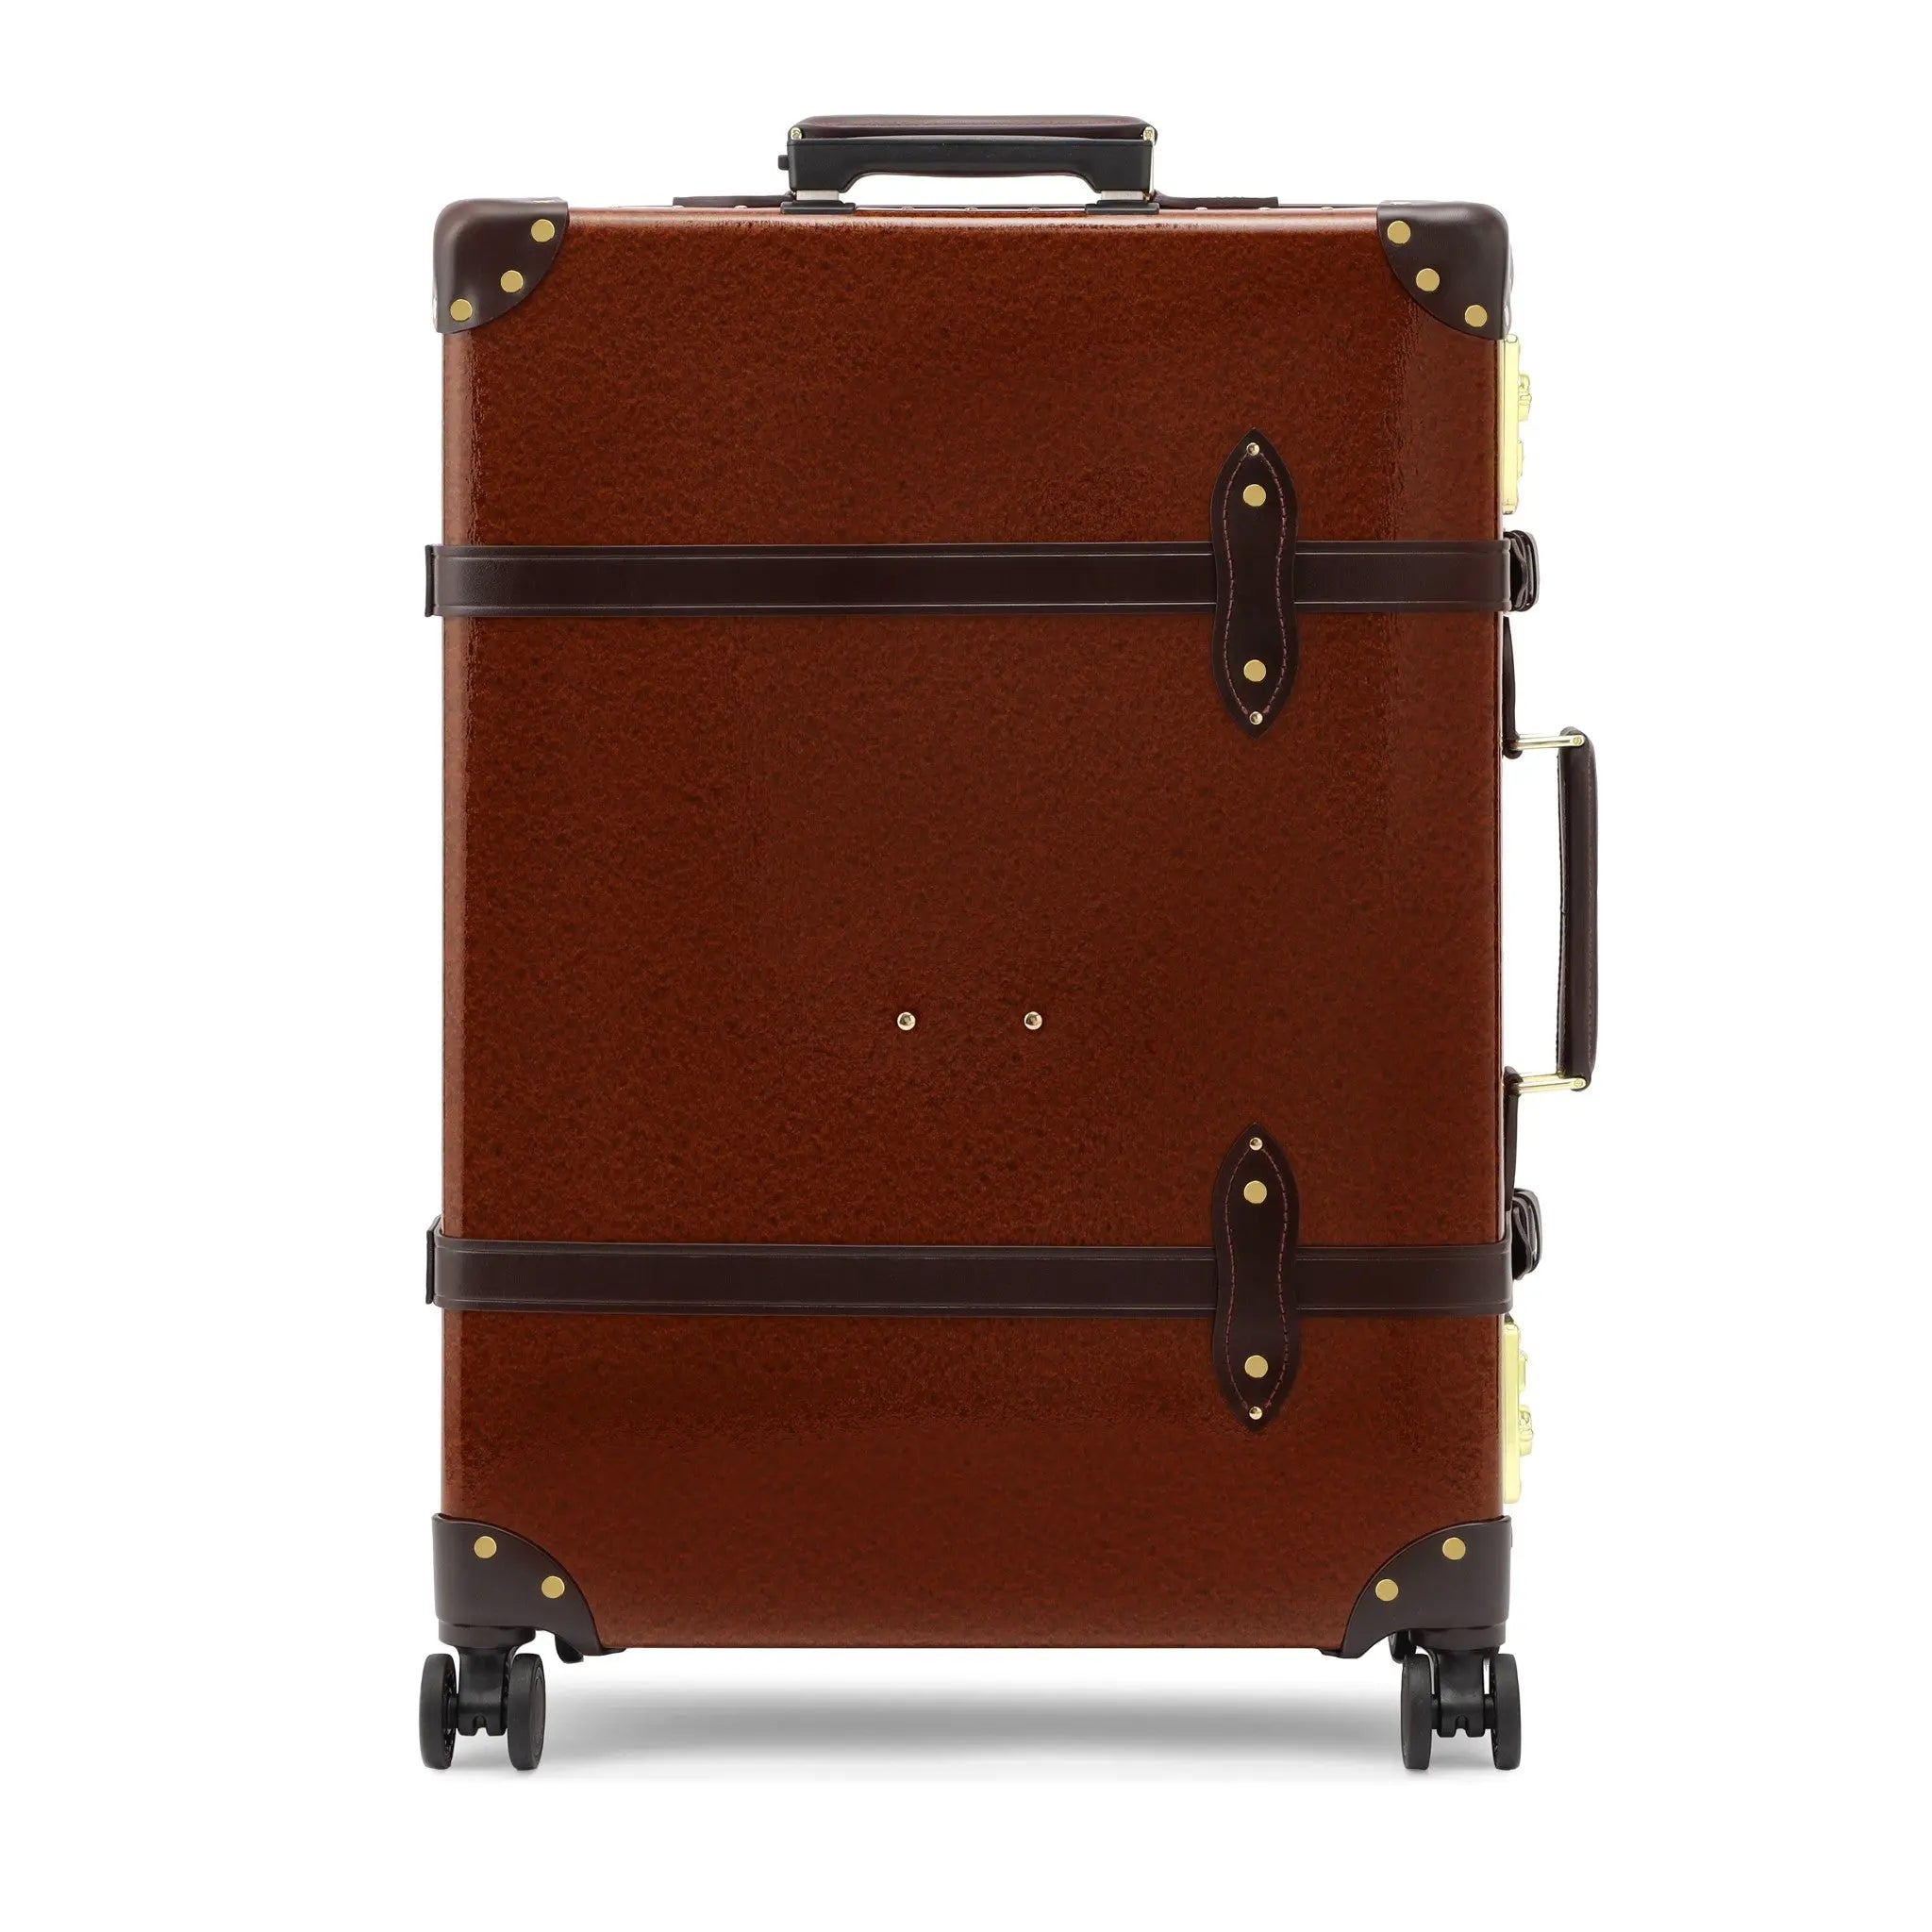 Orient · Large Check-In - 4 Wheels | Urushi/Burgundy/Gold - GLOBE-TROTTER